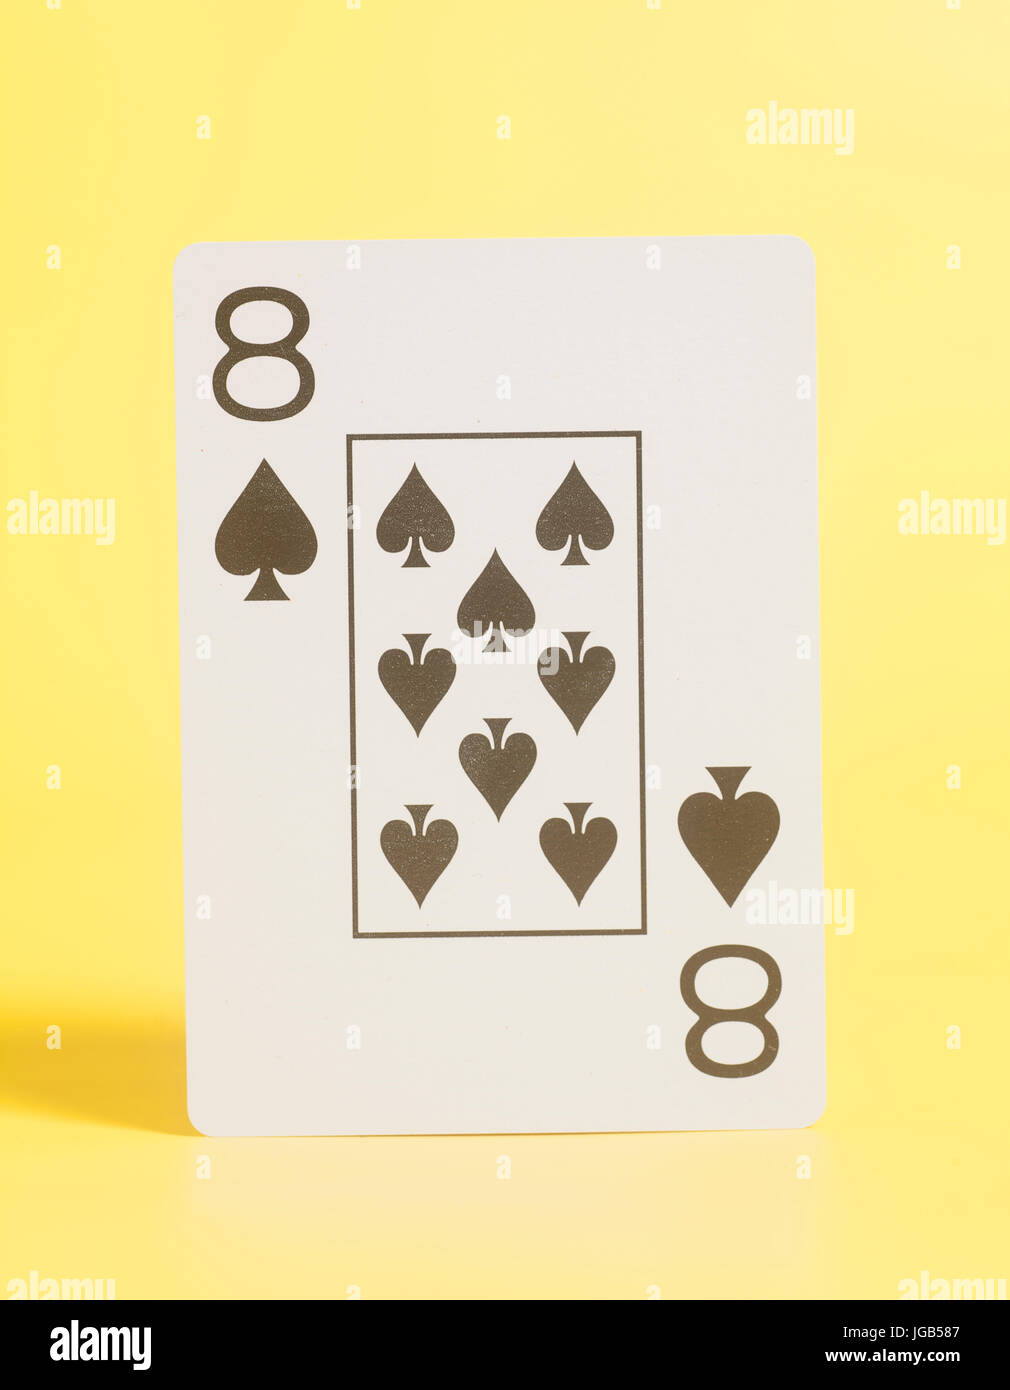 Playing card eight of spades on yellow background Stock Photo